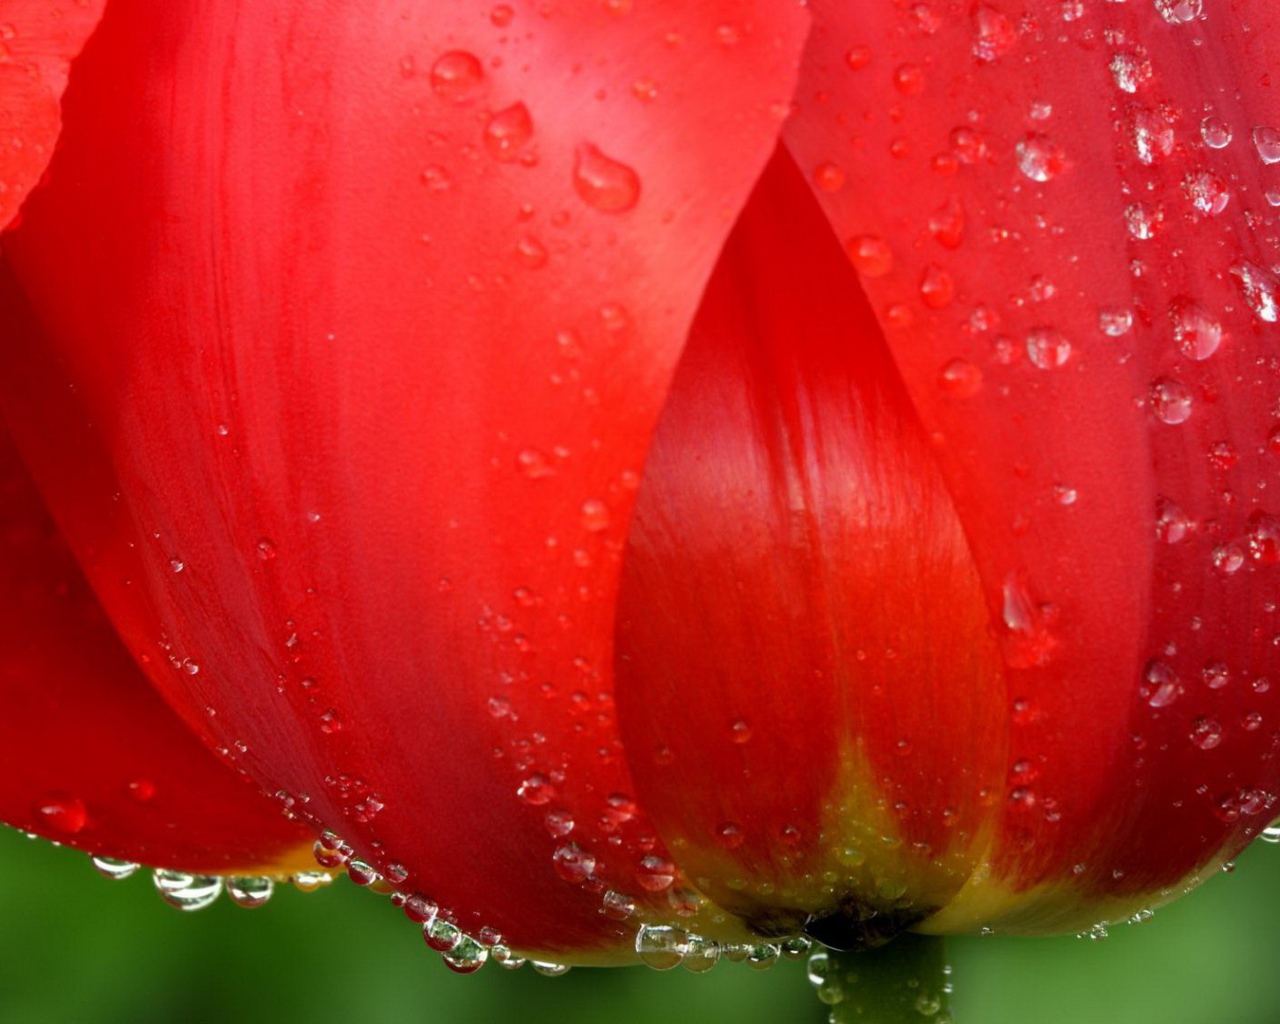 Water drops on the petals of the flower